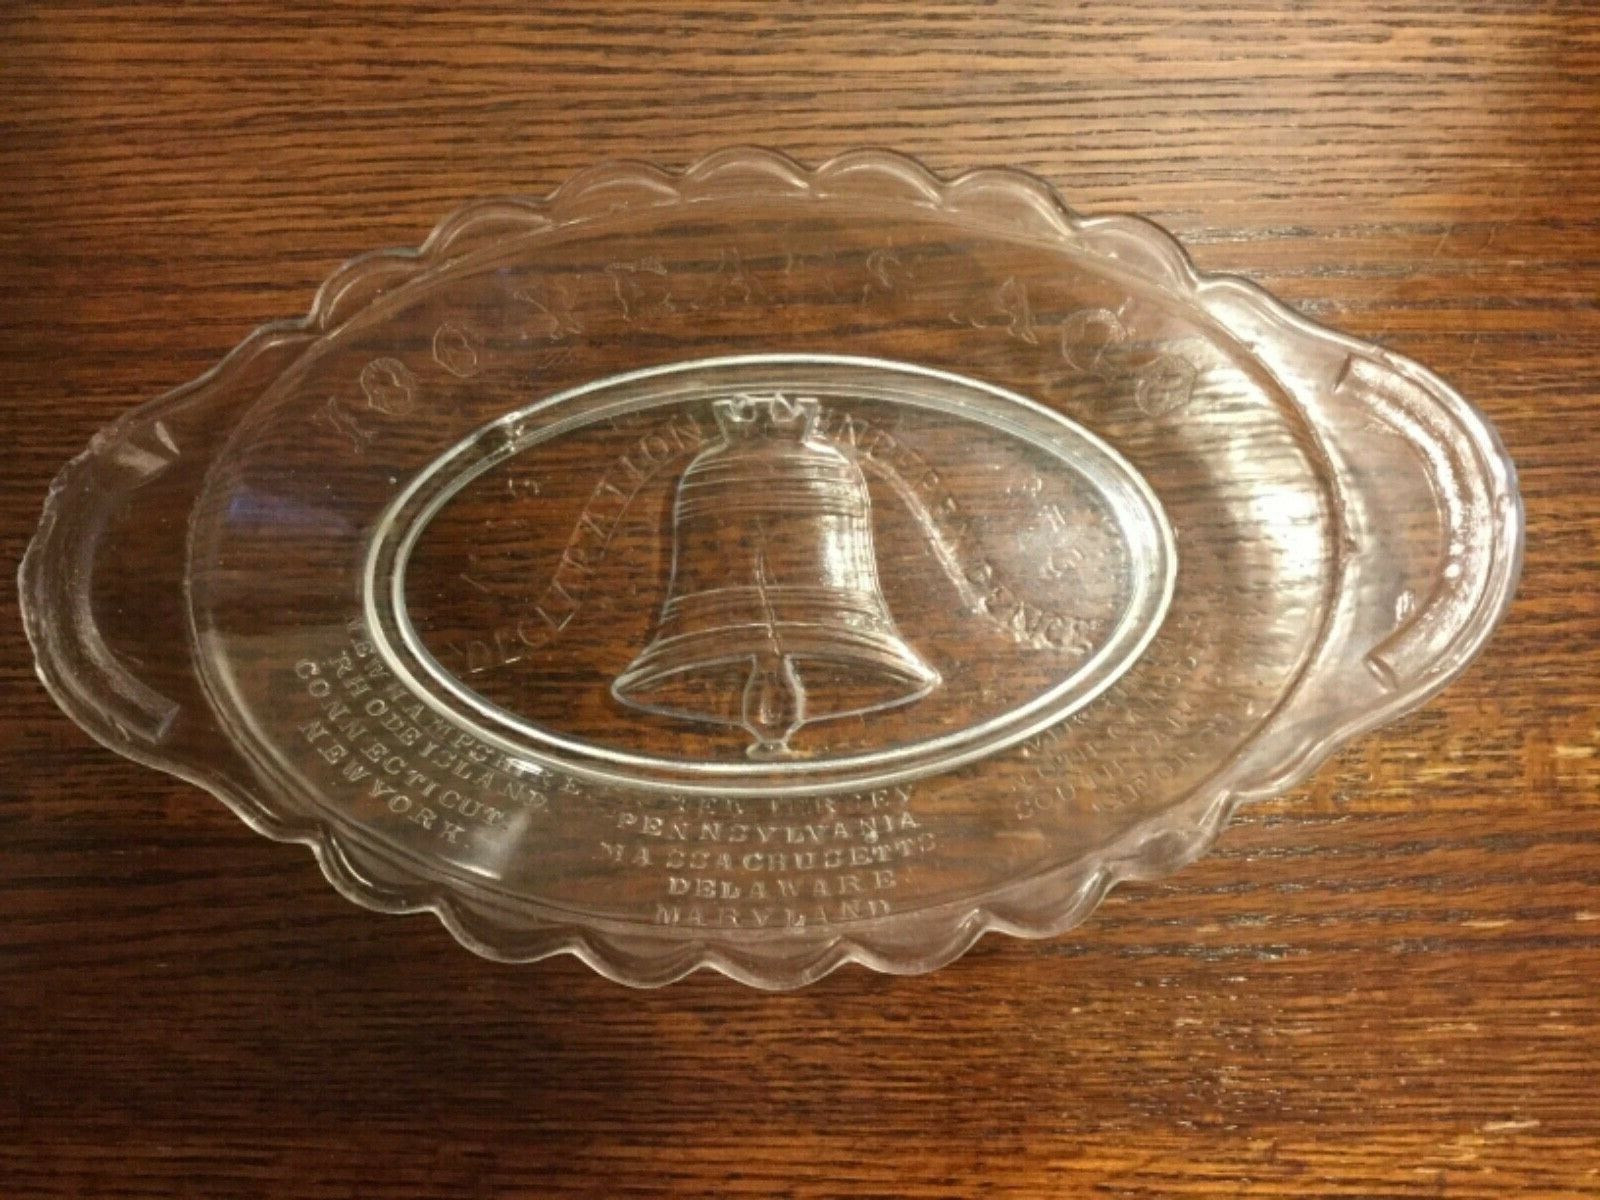 144 year old Antique commemorative bicentennial dish 1776 to 1876